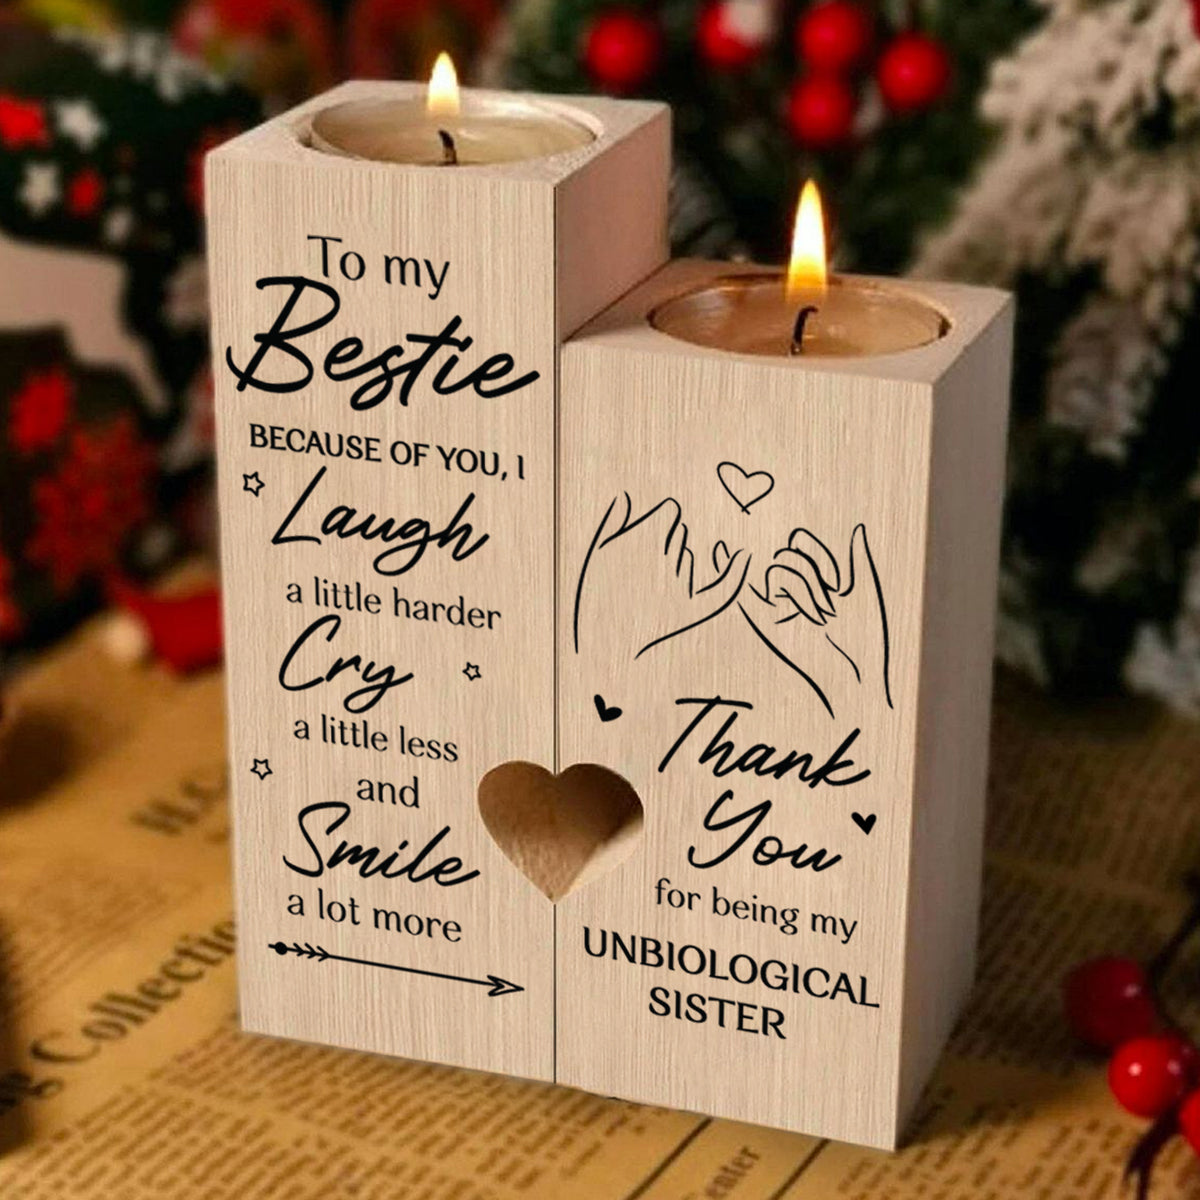 To My Bestie - Smile a lot more - Candle Holder